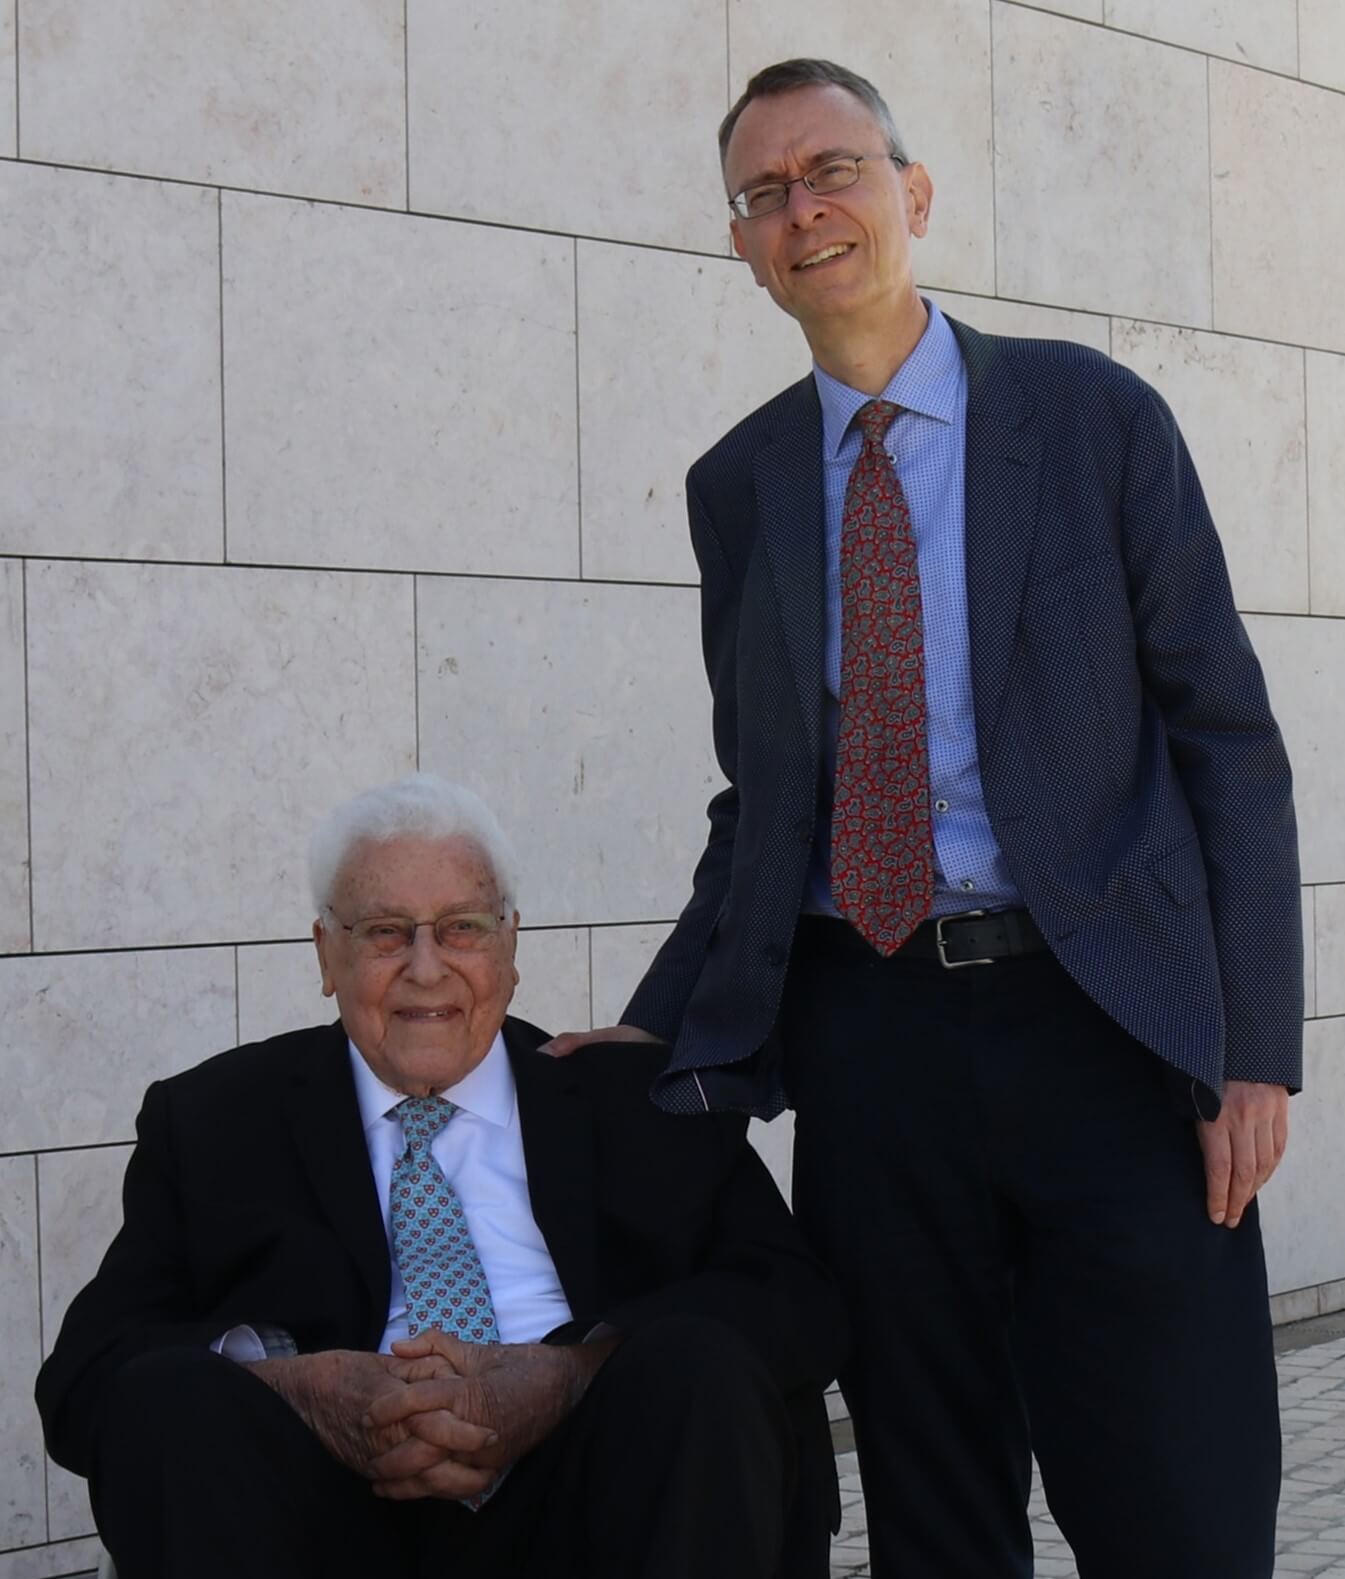 2023 Champalimaud Award Lecture speakers: Dohlman and Melles